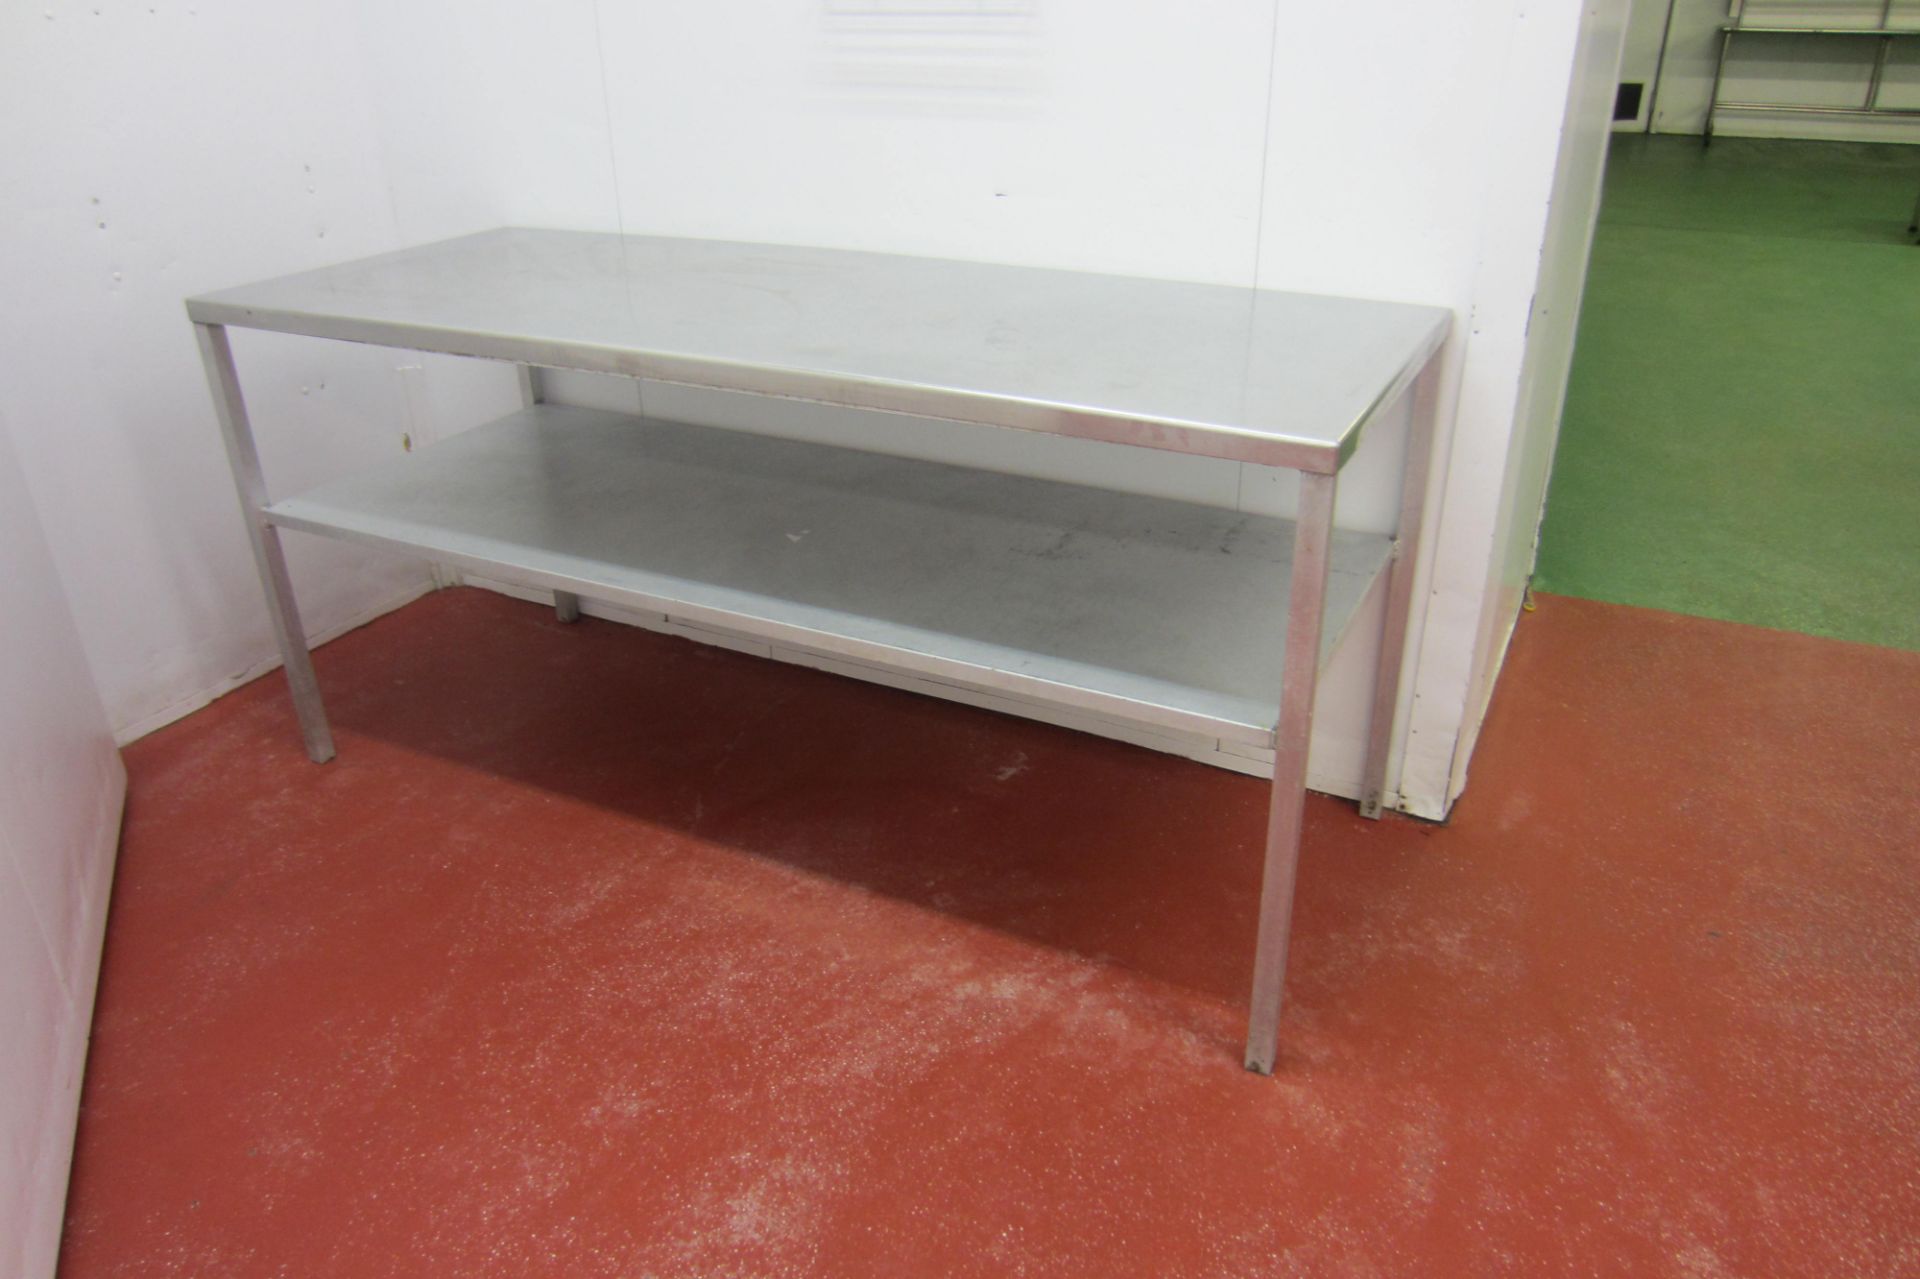 4 x Stainless Steel Prep/Work Tables with Shelves Under. Size 1 x 175cm x 70cm, 1 x 180cm x 70cm,